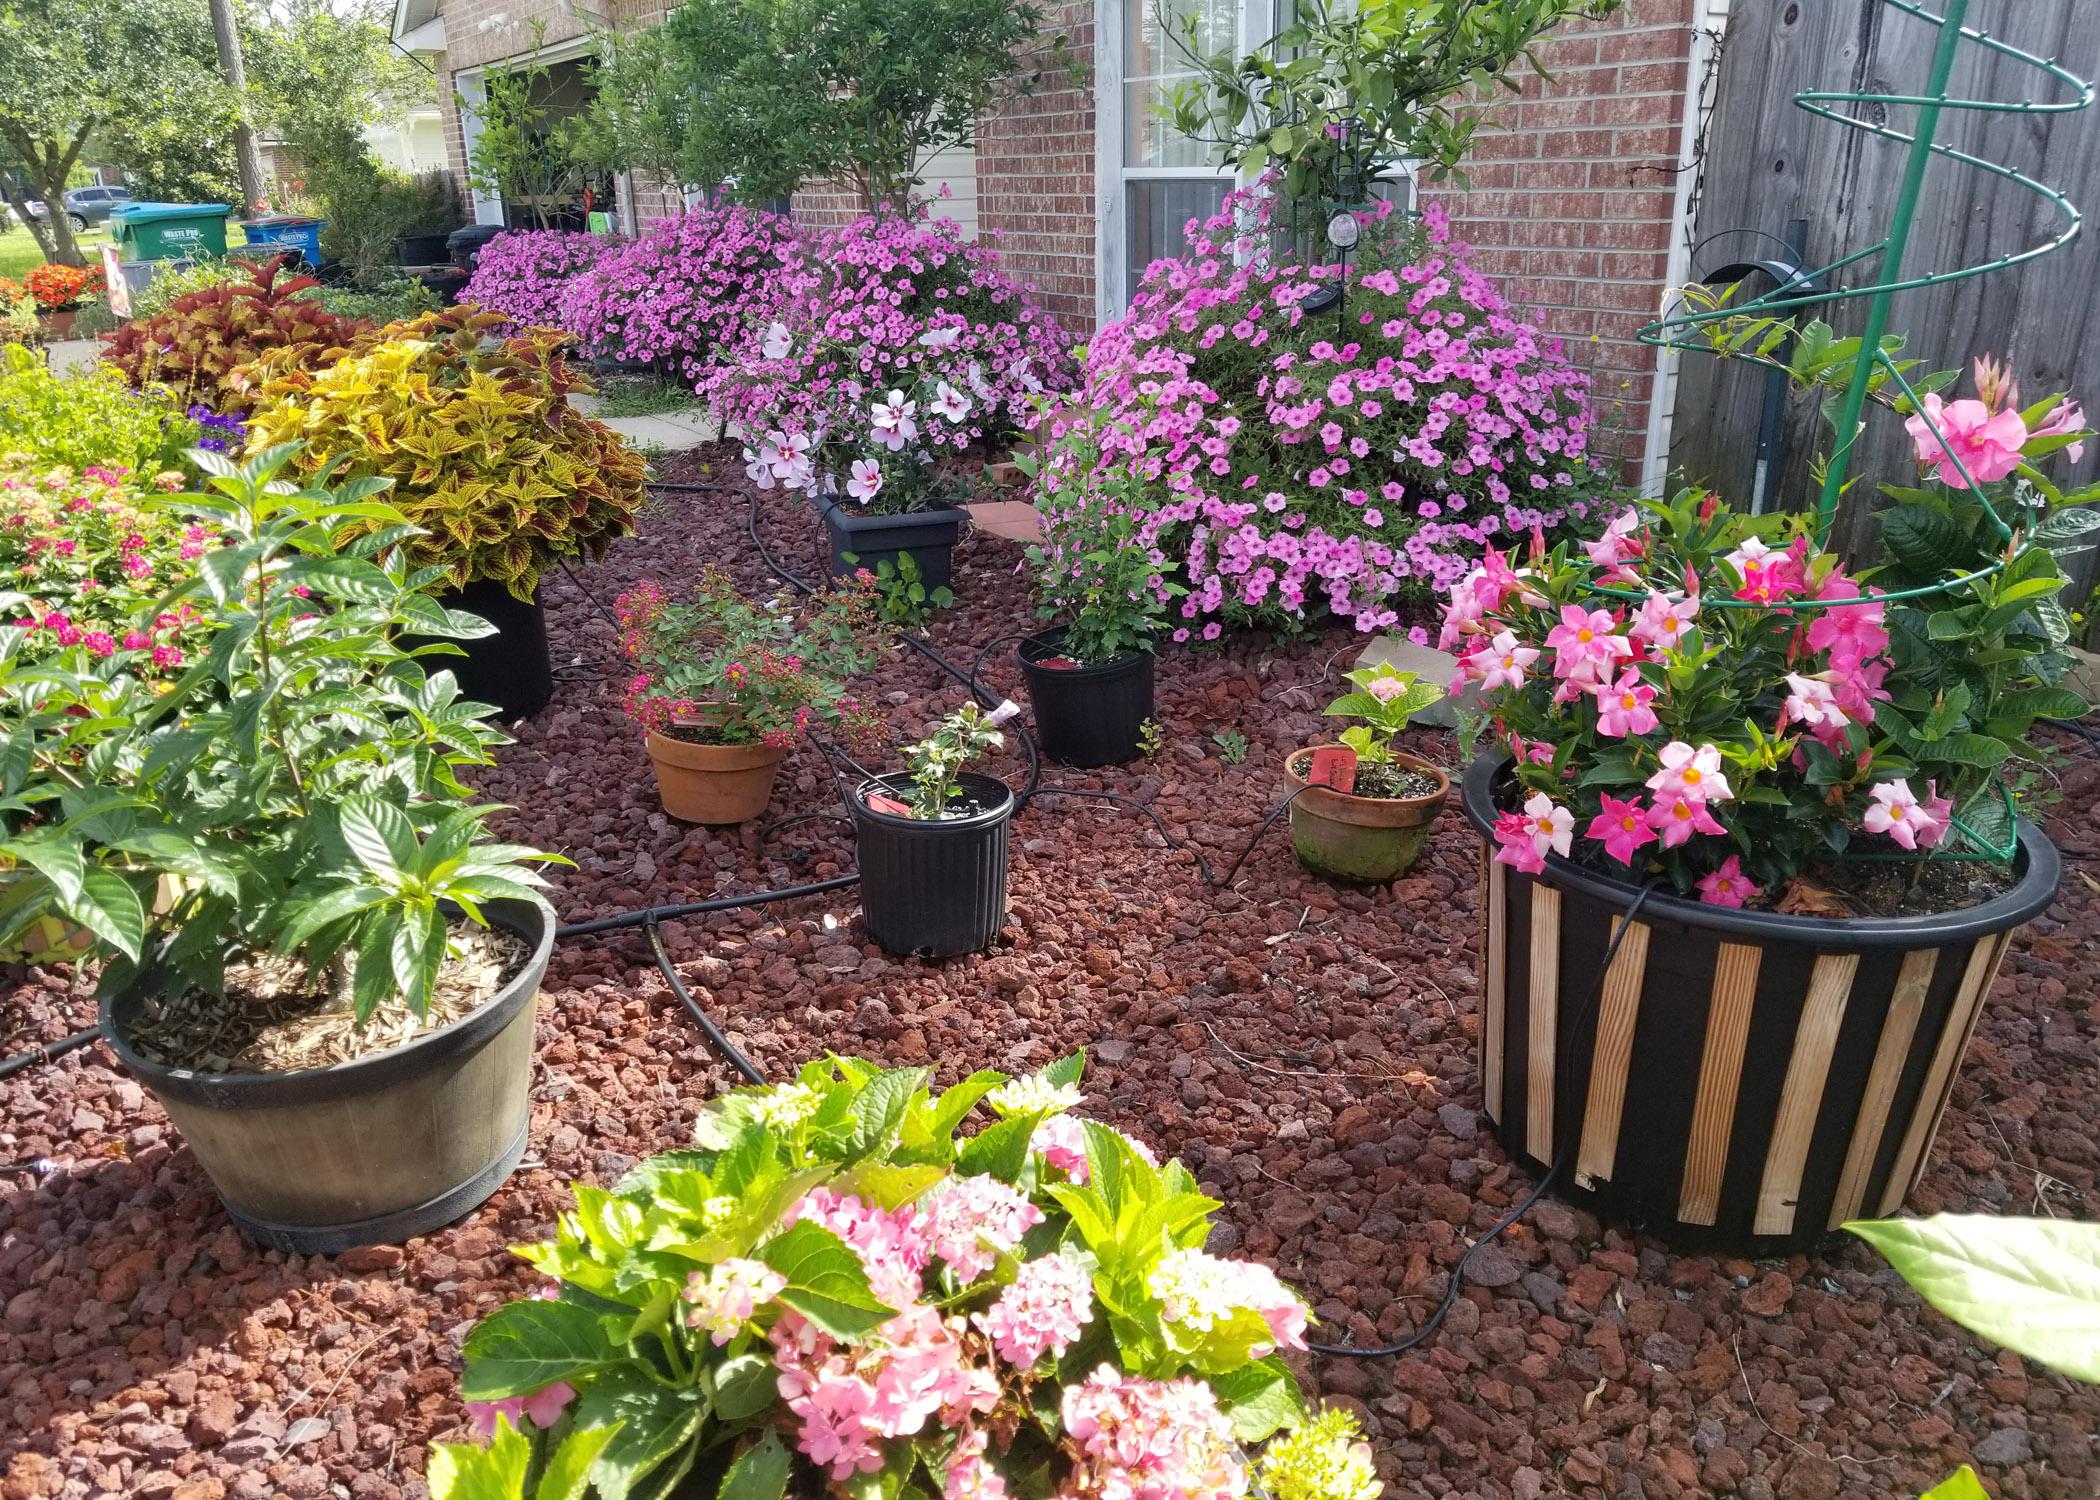 A variety of different sized and colored containers rest on a bed of gravel.